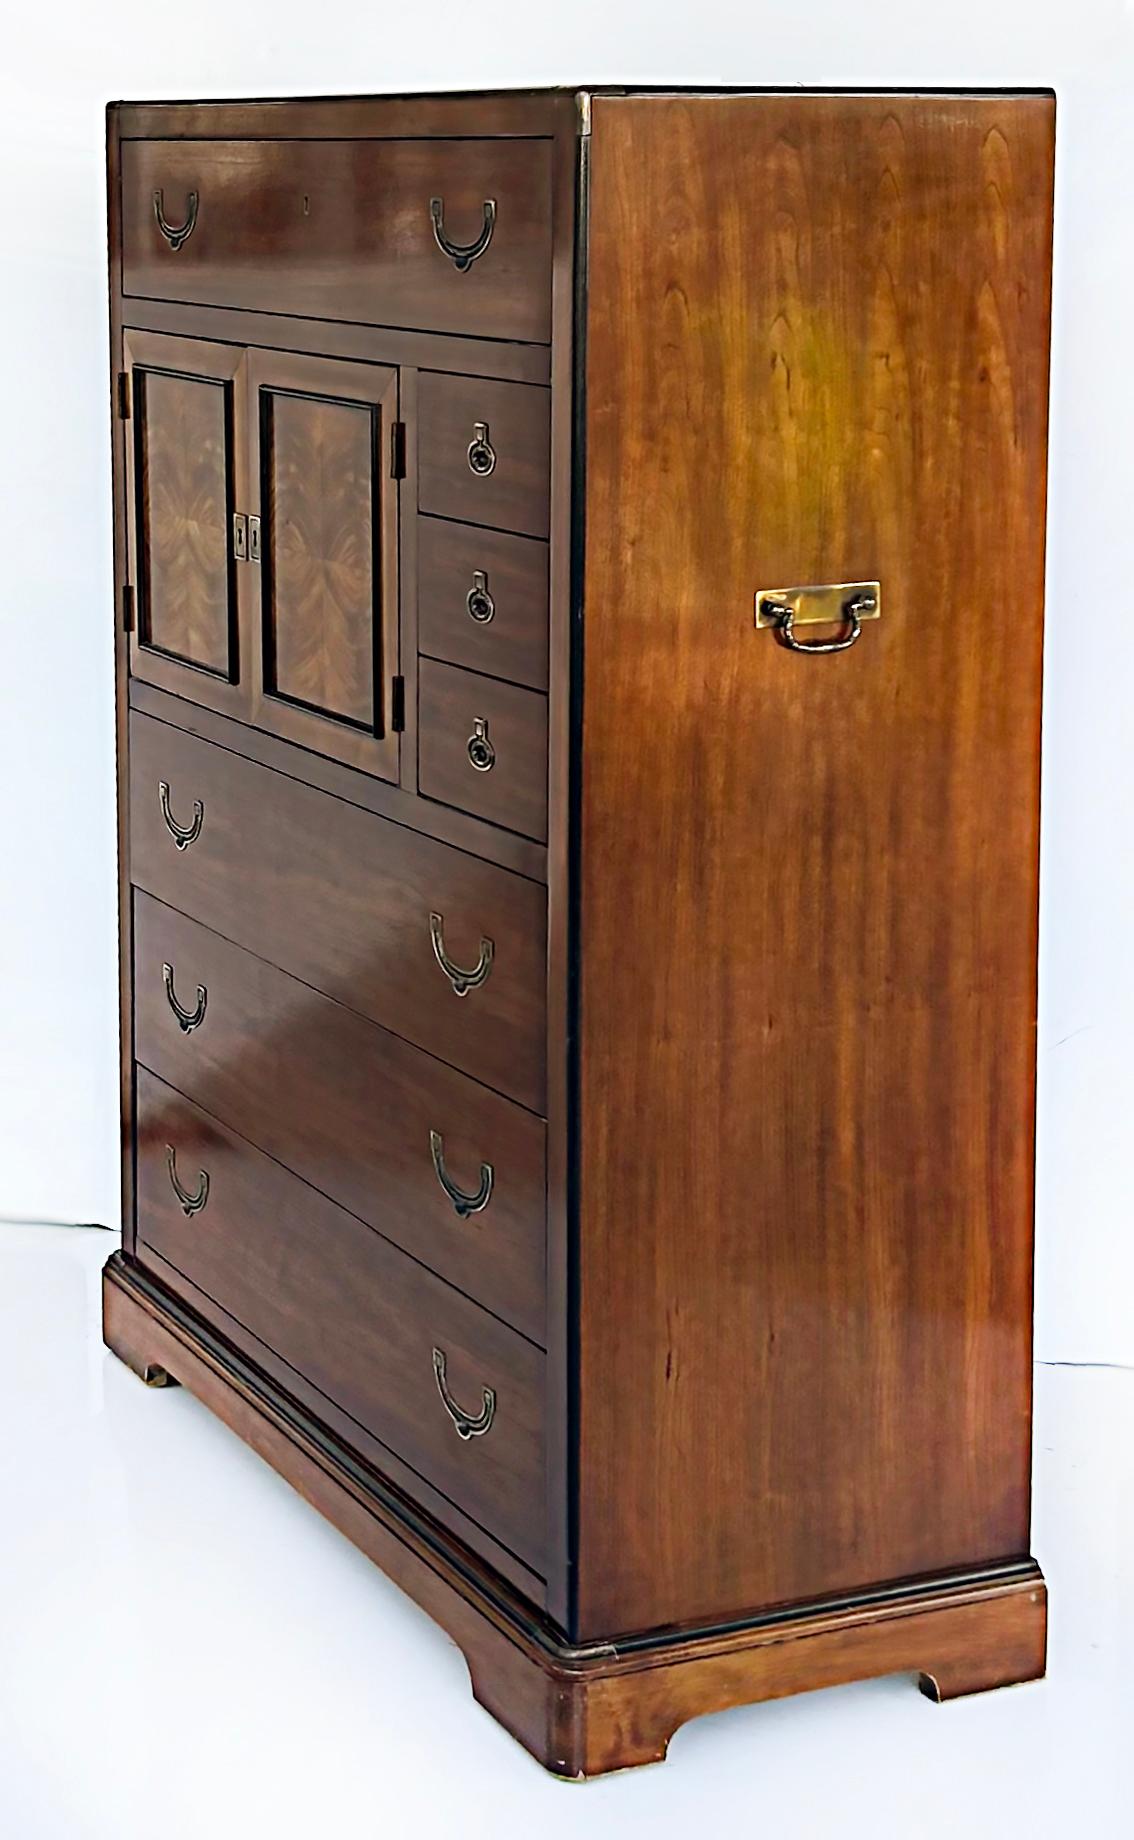 Midcentury National Mt. Airy Campaign Tall Chest of Drawers, Mahogany 

Offered for sale is a large, monumental mid-century modern tall chest of drawers by National Mt. Airy Furniture. The tall chest is made of solid mahogany with flamed mahogany